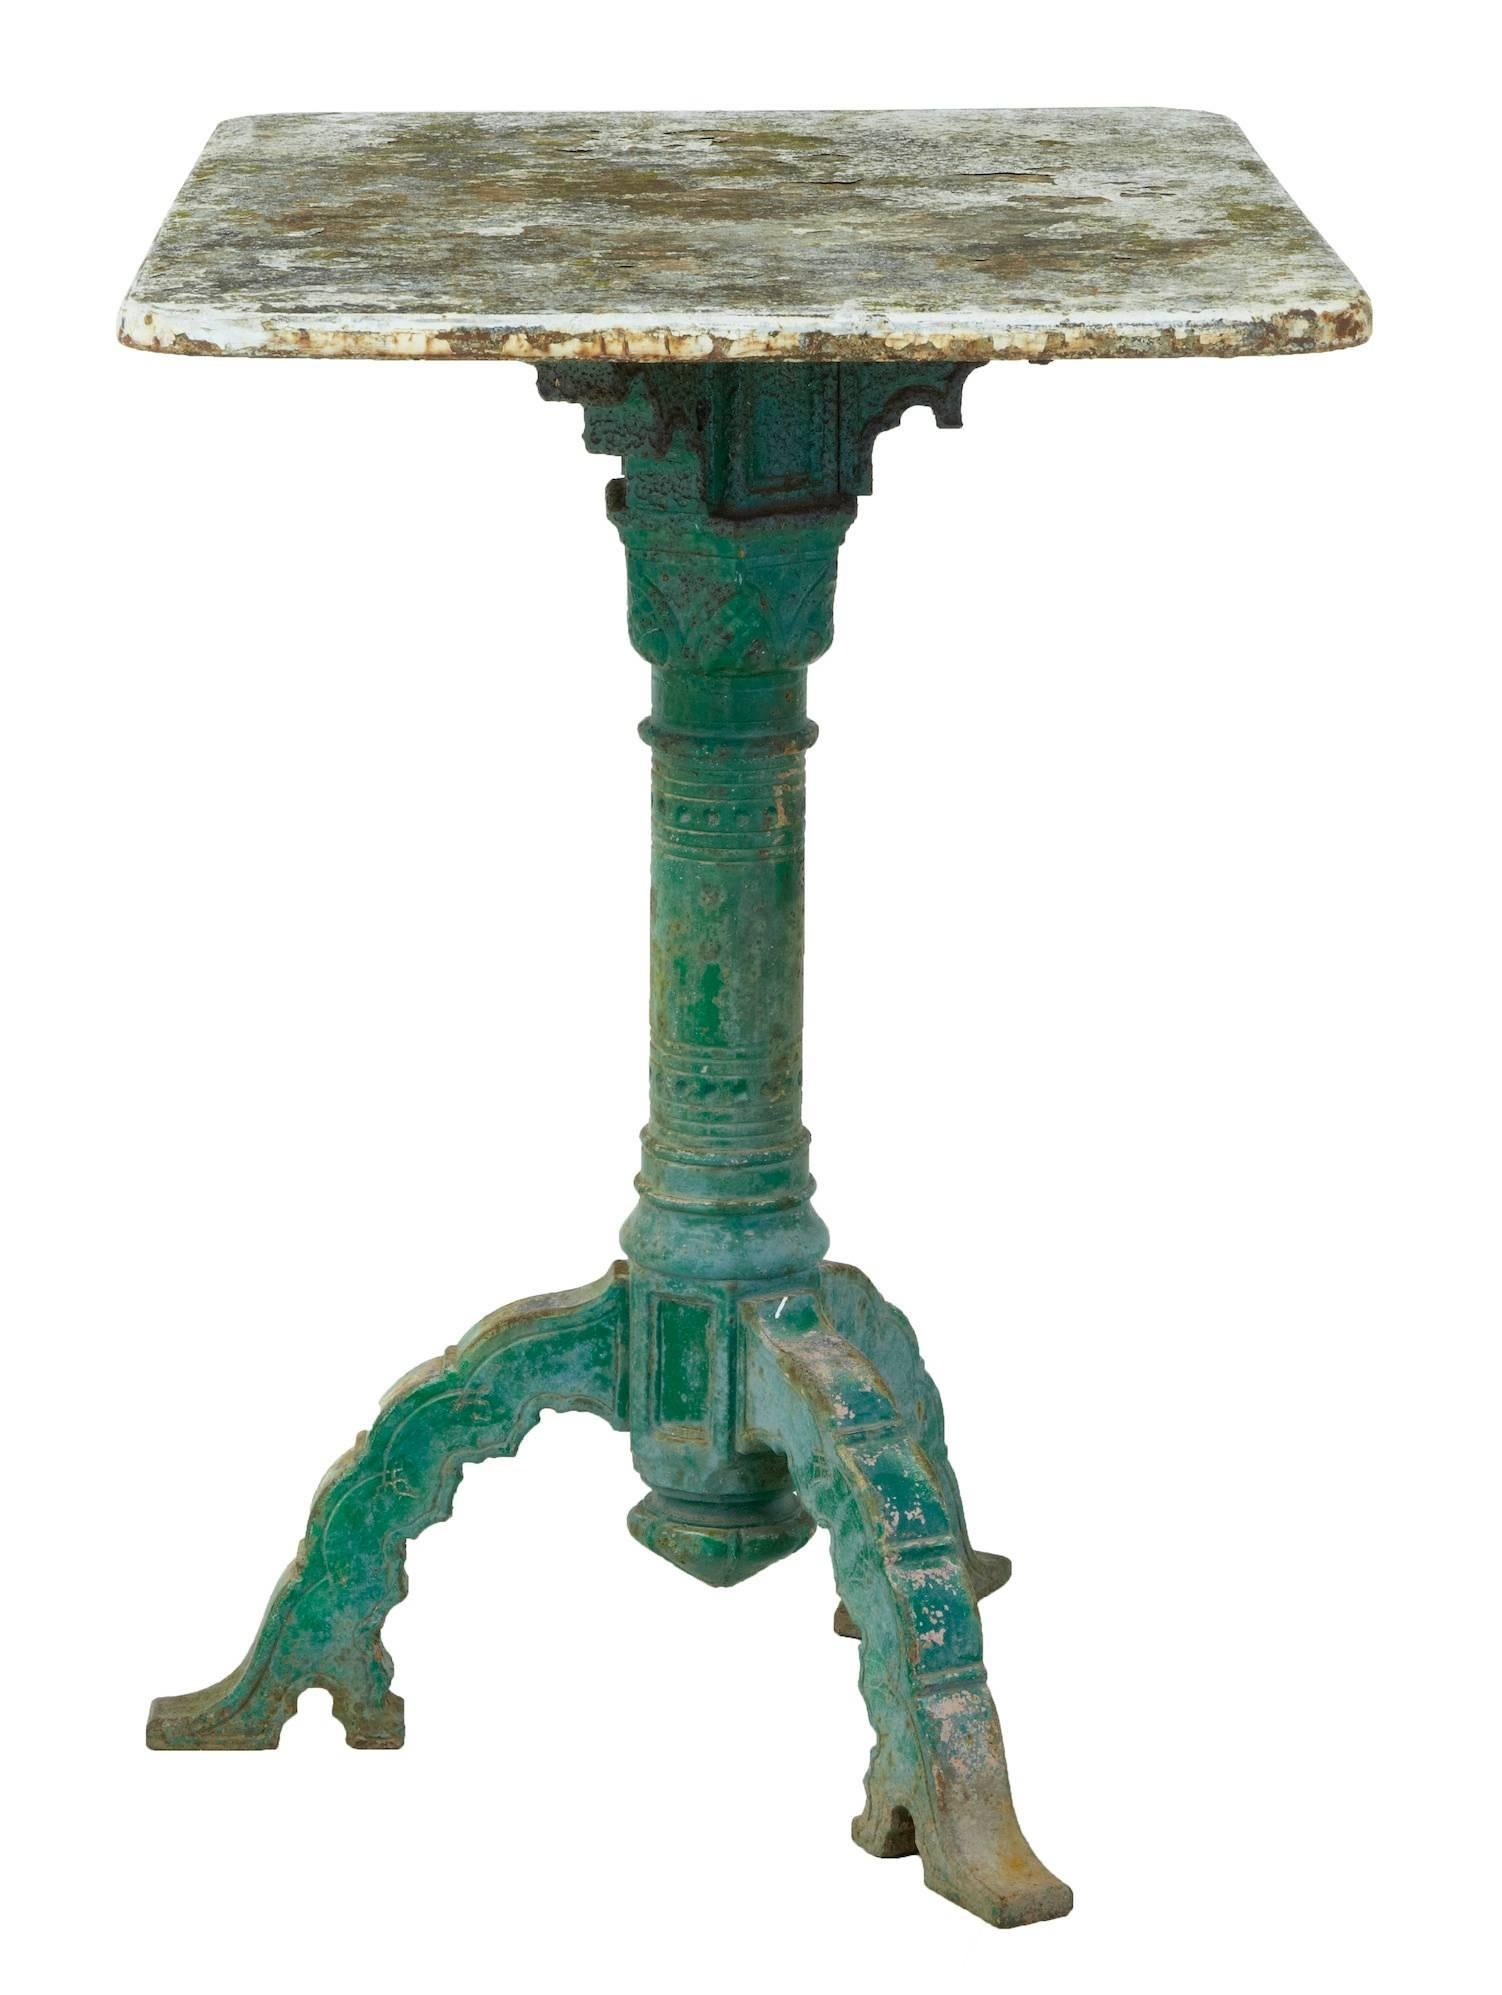 Here we have a excellent early example of a Victorian iron table, circa 1860.
In original condition with original paint.
Stunning stem with tripod base.
Obvious signs of wear and rust but surface area is stabile and not flaking.
Rare opportunity